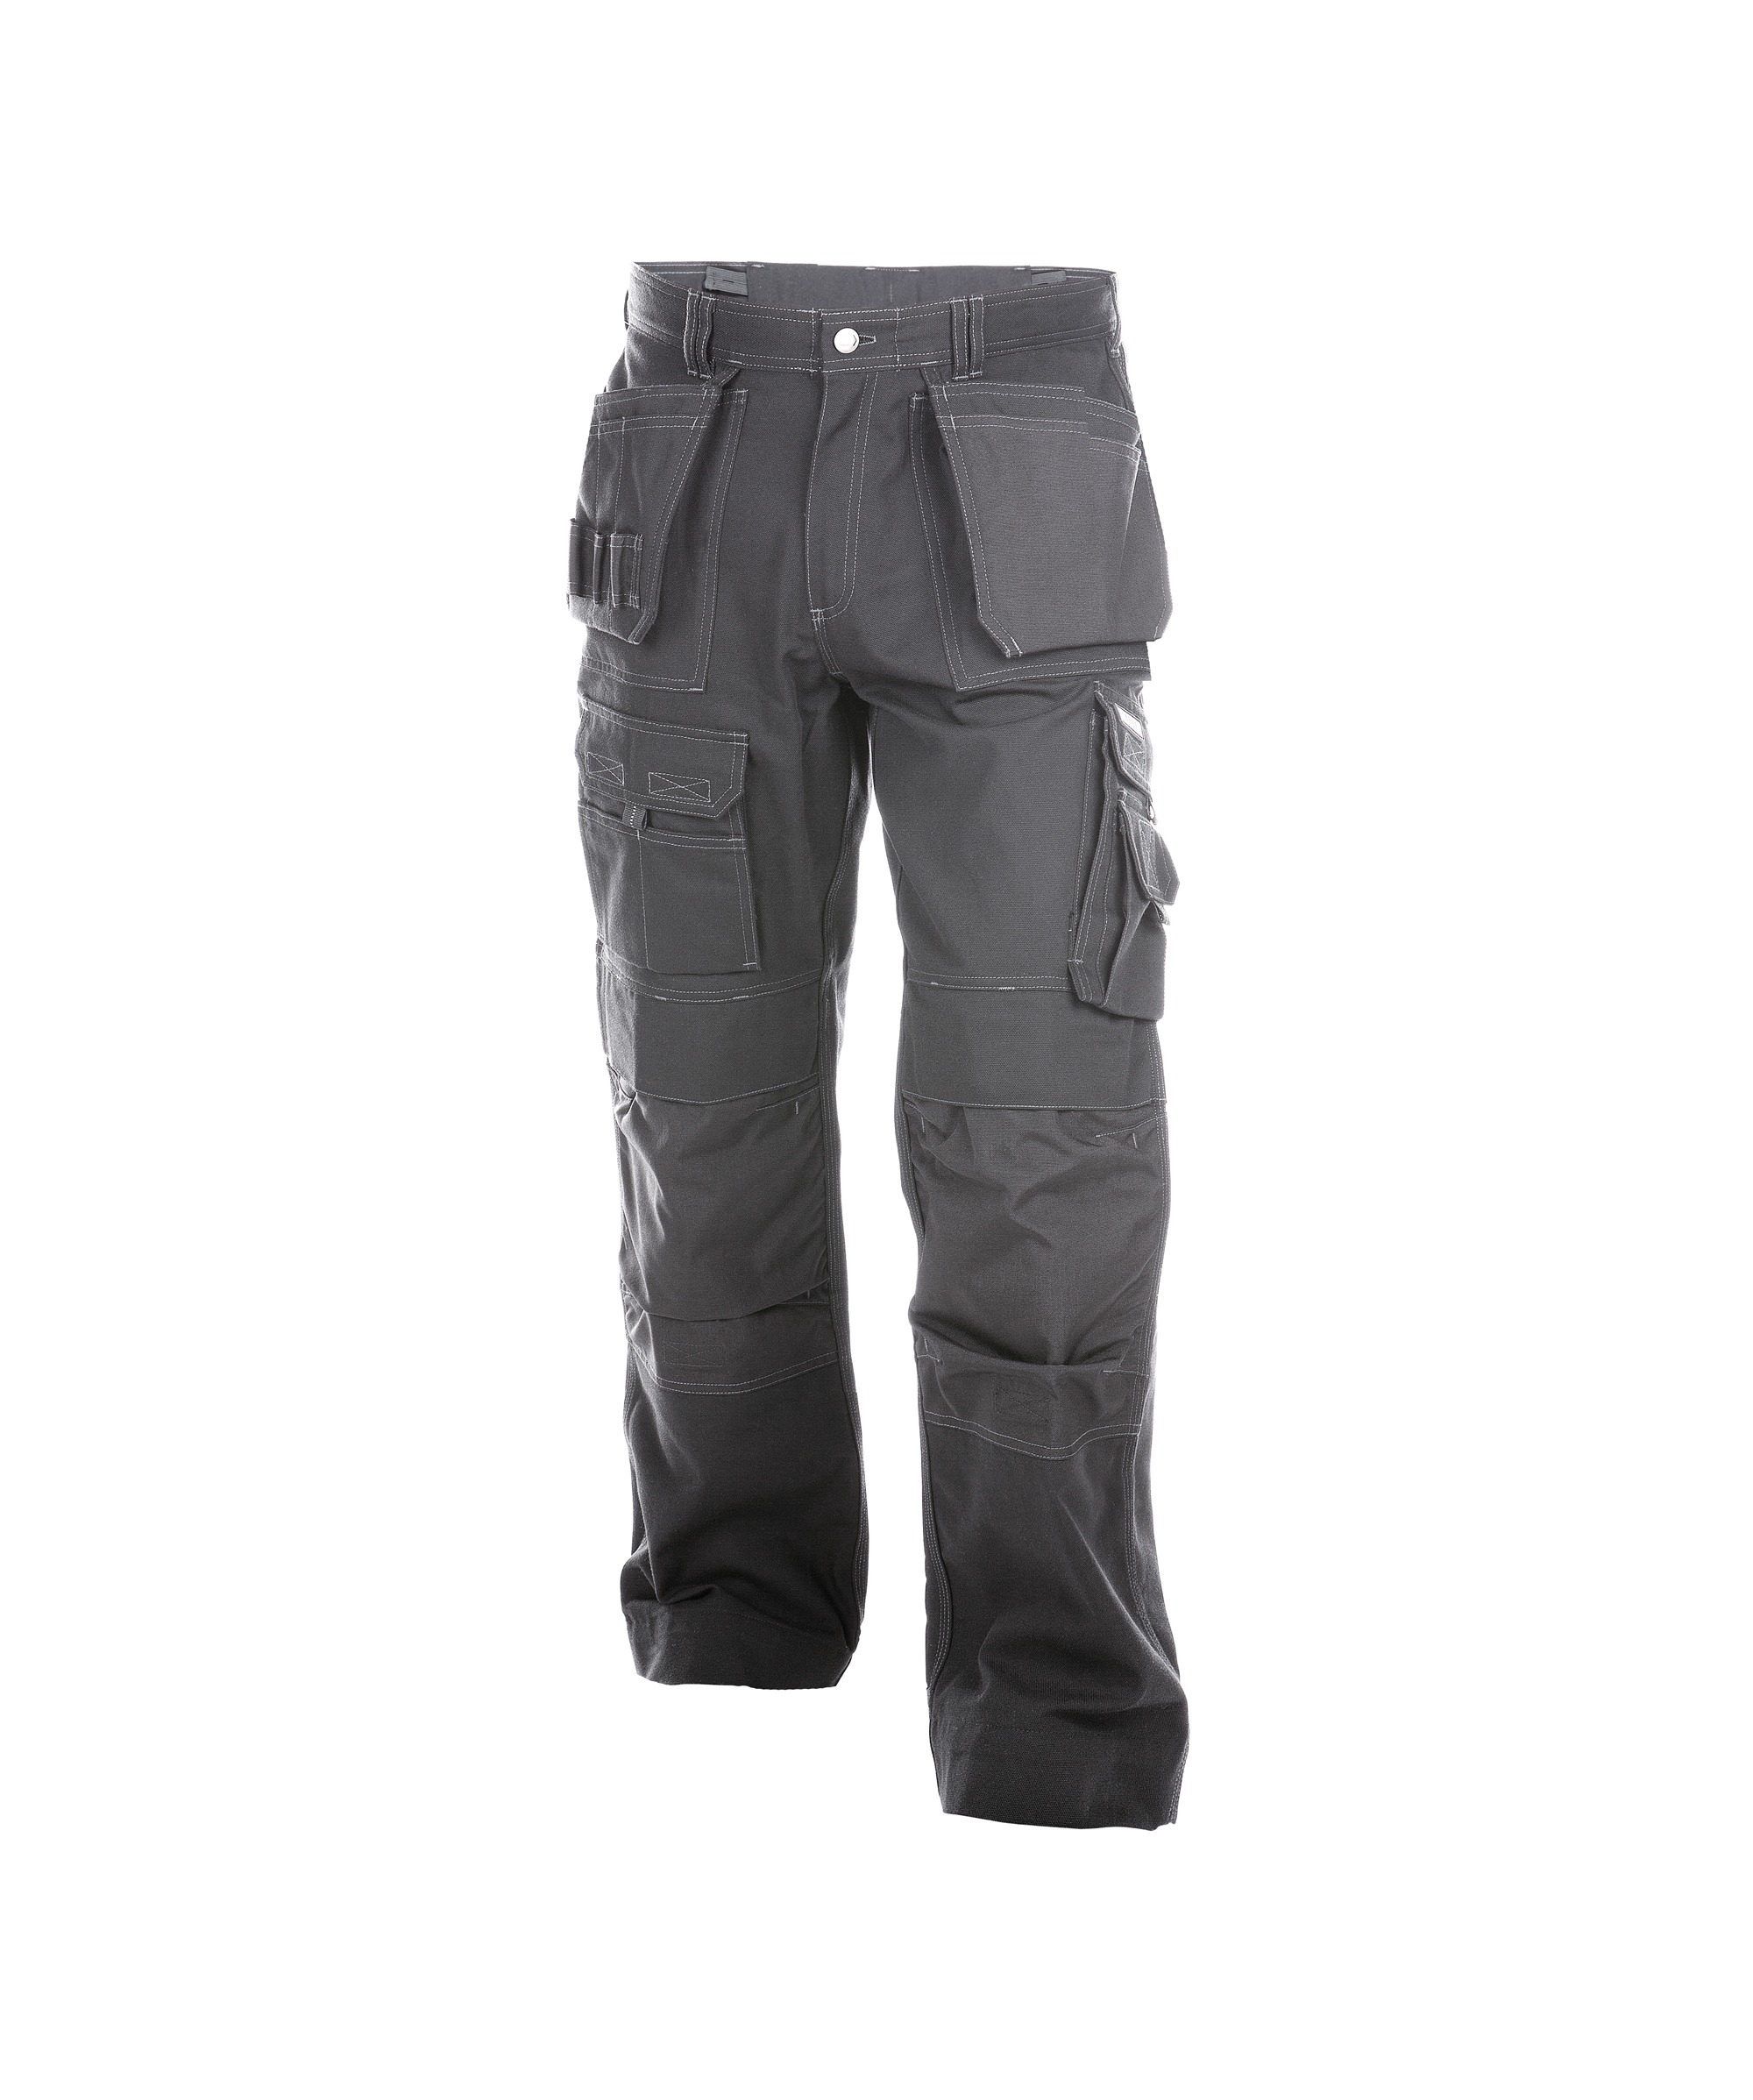 texas_canvas-trousers-with-holster-pockets-and-knee-pockets_cement-grey_front